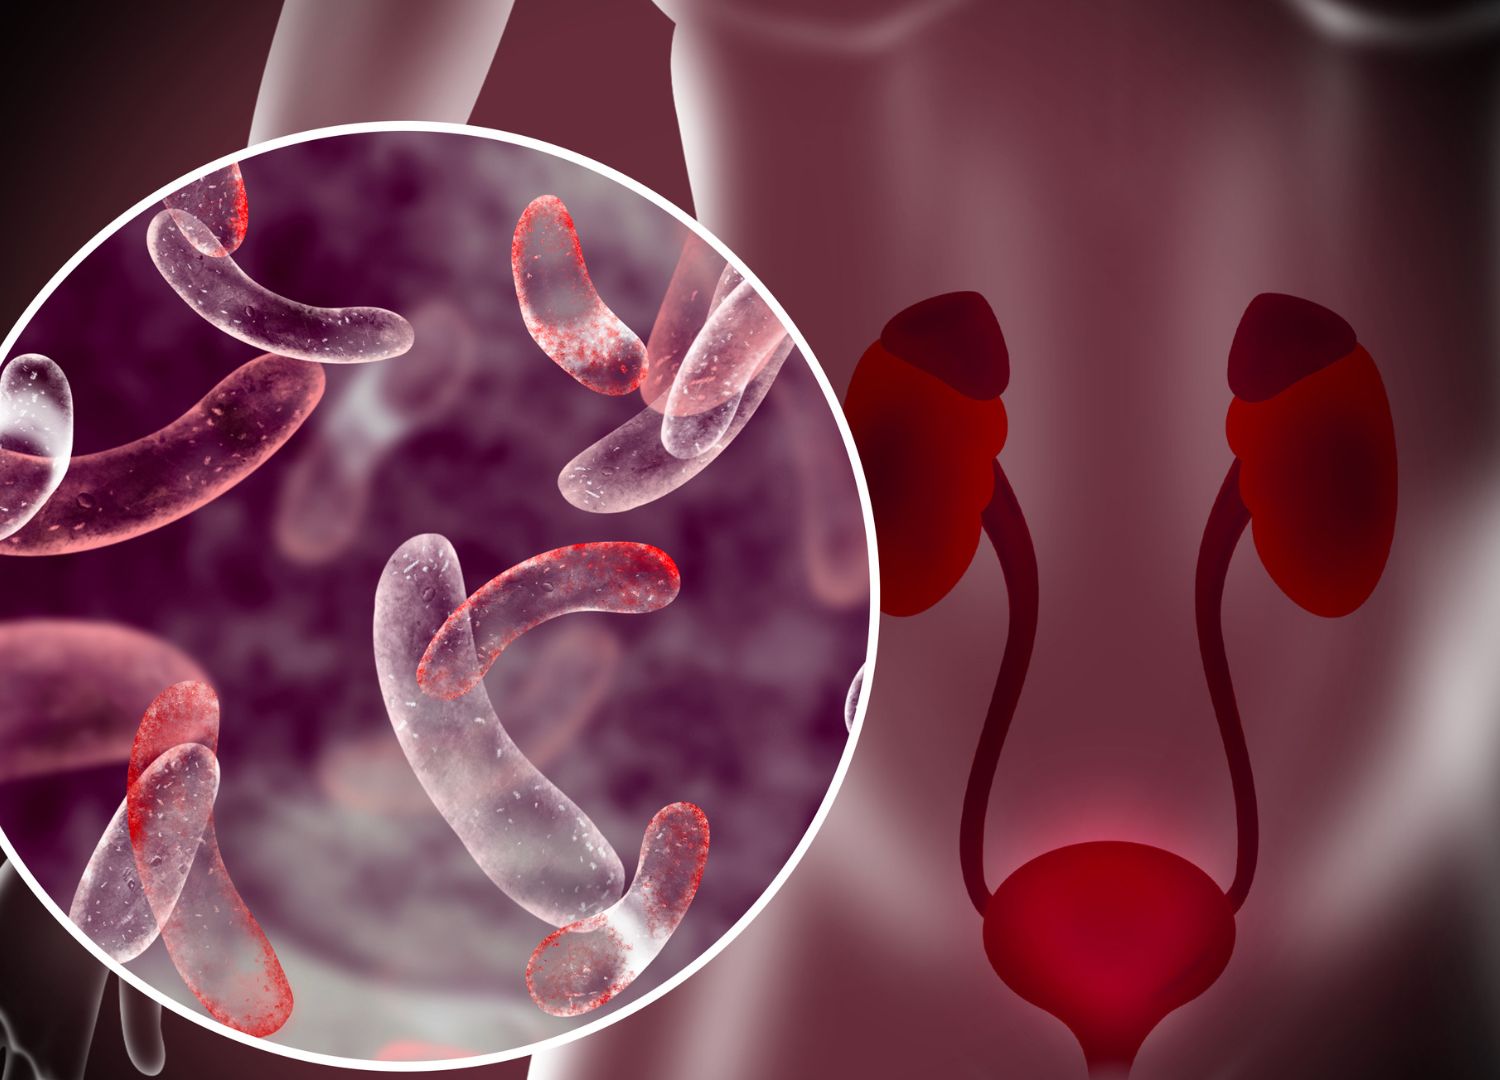 "Why this burning: Urinary Tract  Infection  (UTI) in Women"